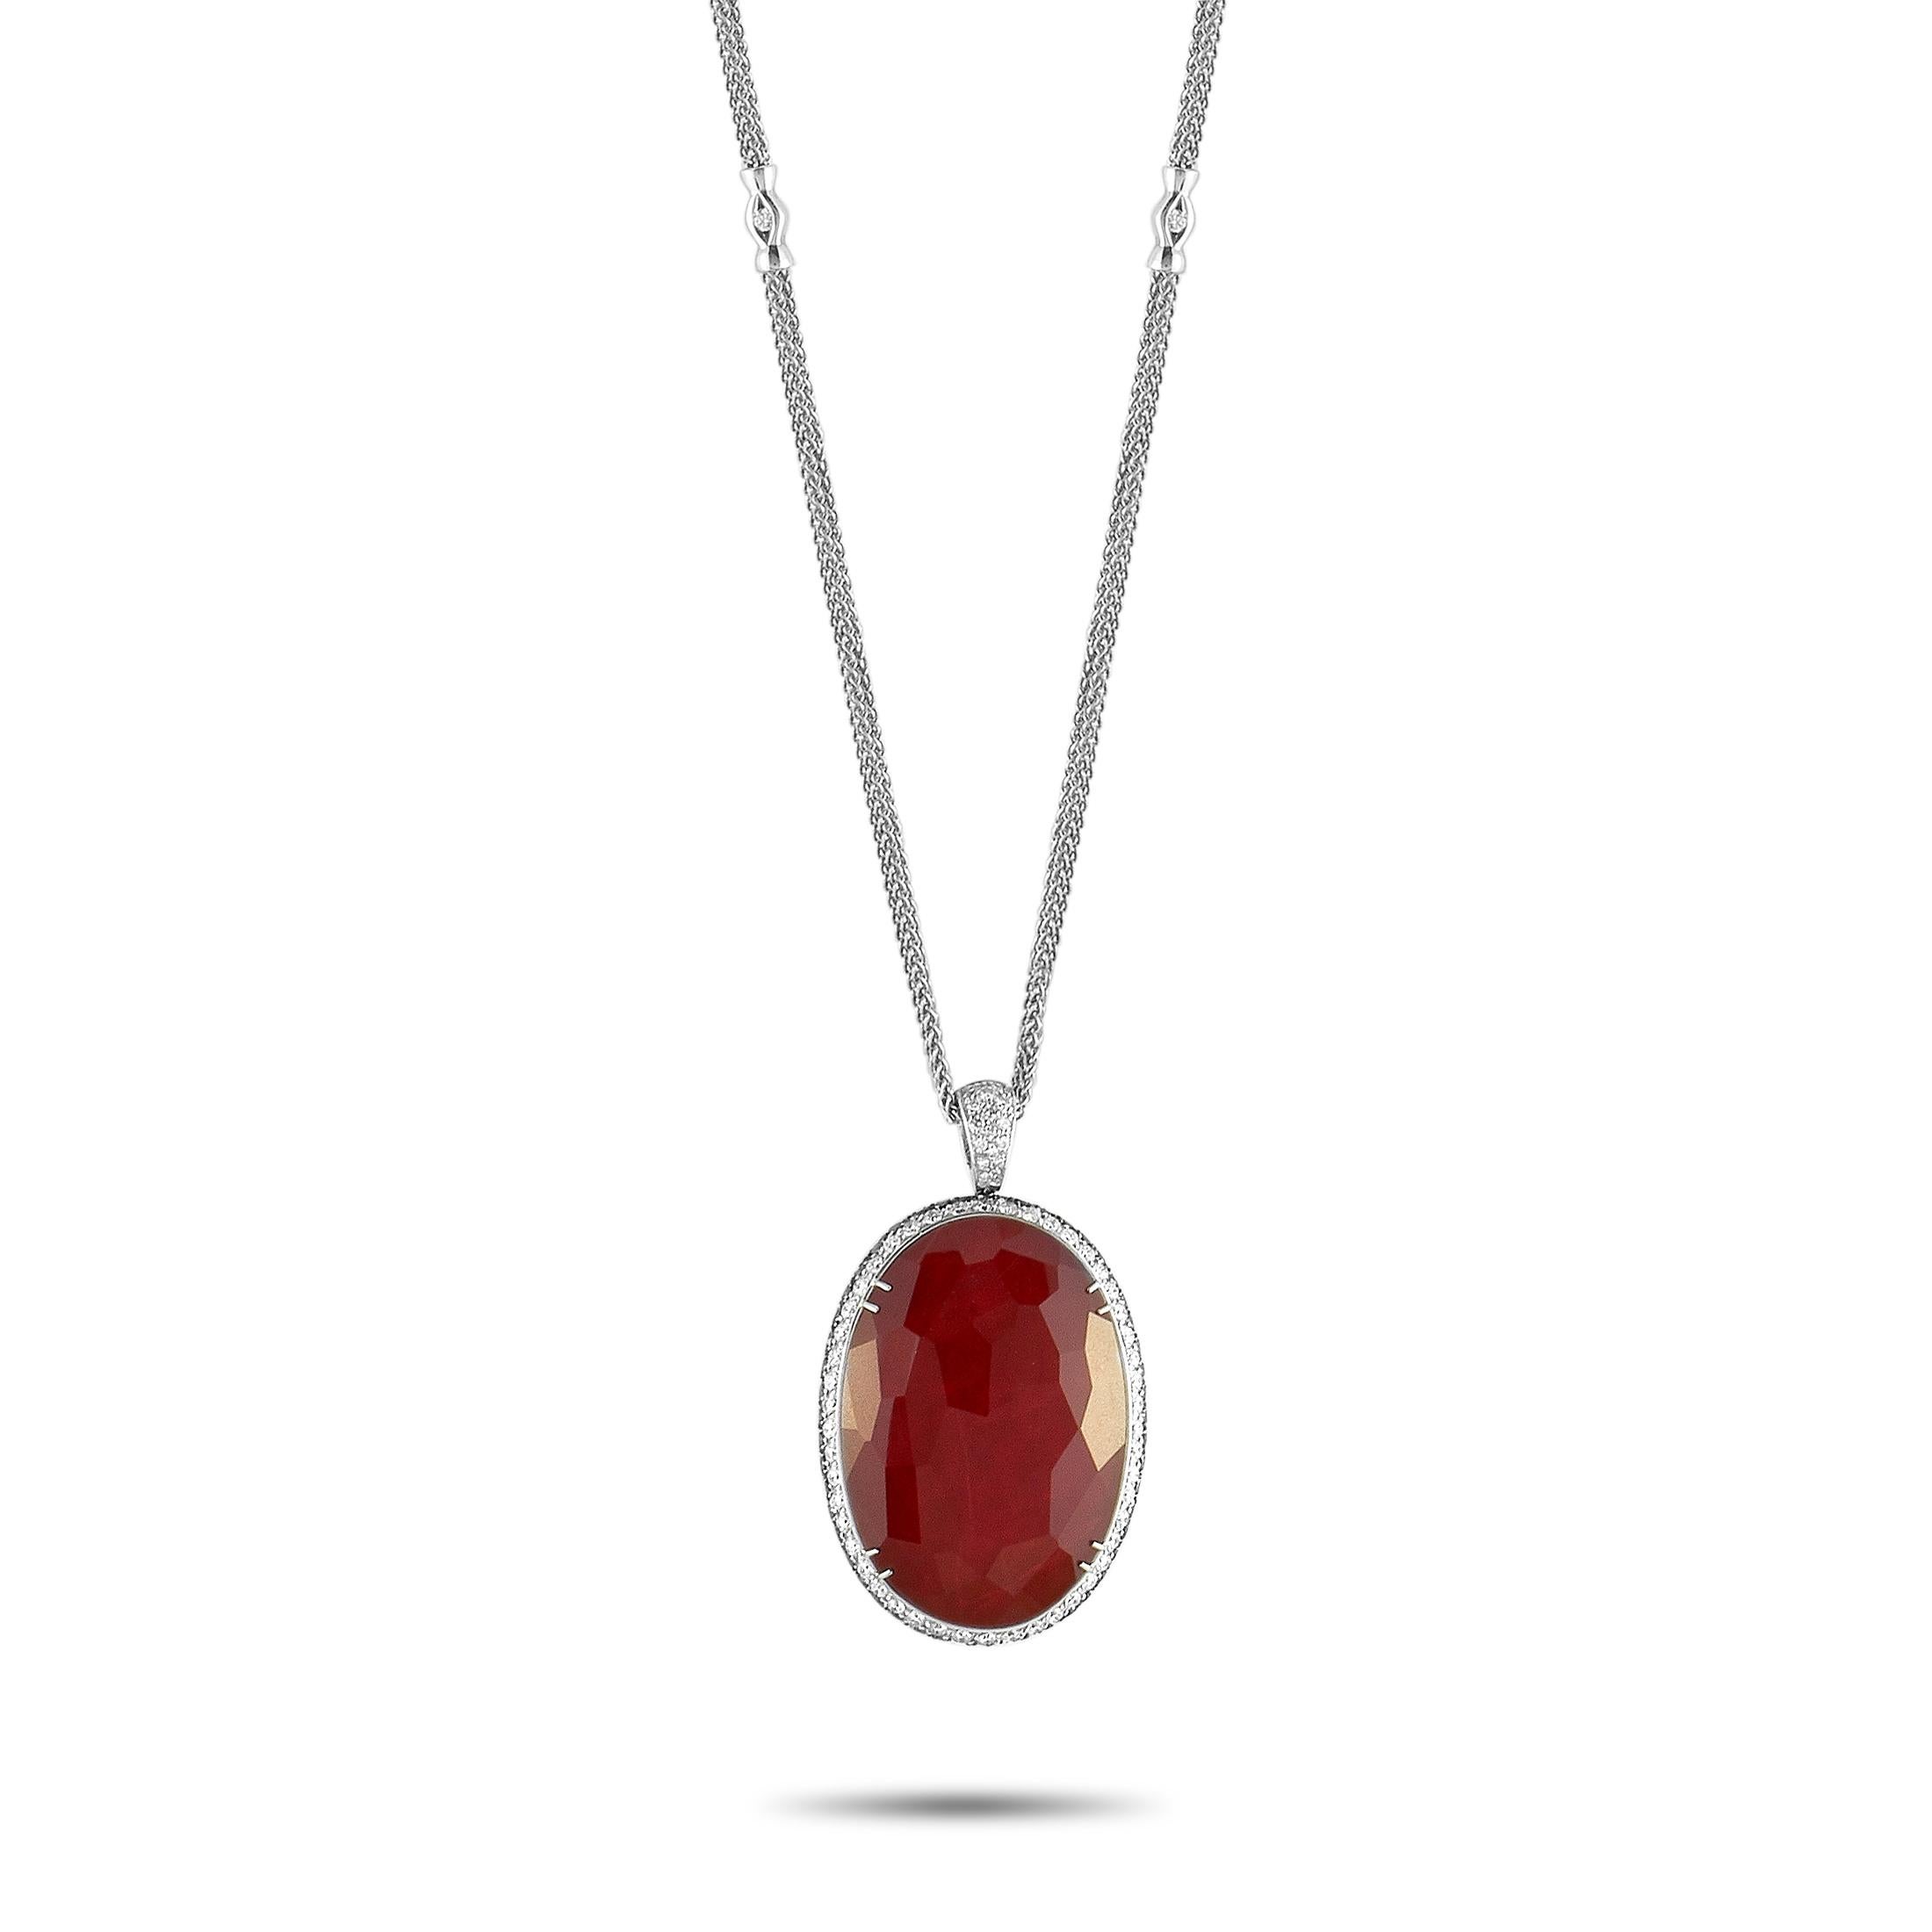 This Oro Trend necklace is crafted from 18K white gold and set with a carnelian and with white and black diamonds that total 2.14 and 4.05 carats respectively. The necklace weighs 53.5 grams and is presented with a 22” chain, boasting a pendant that